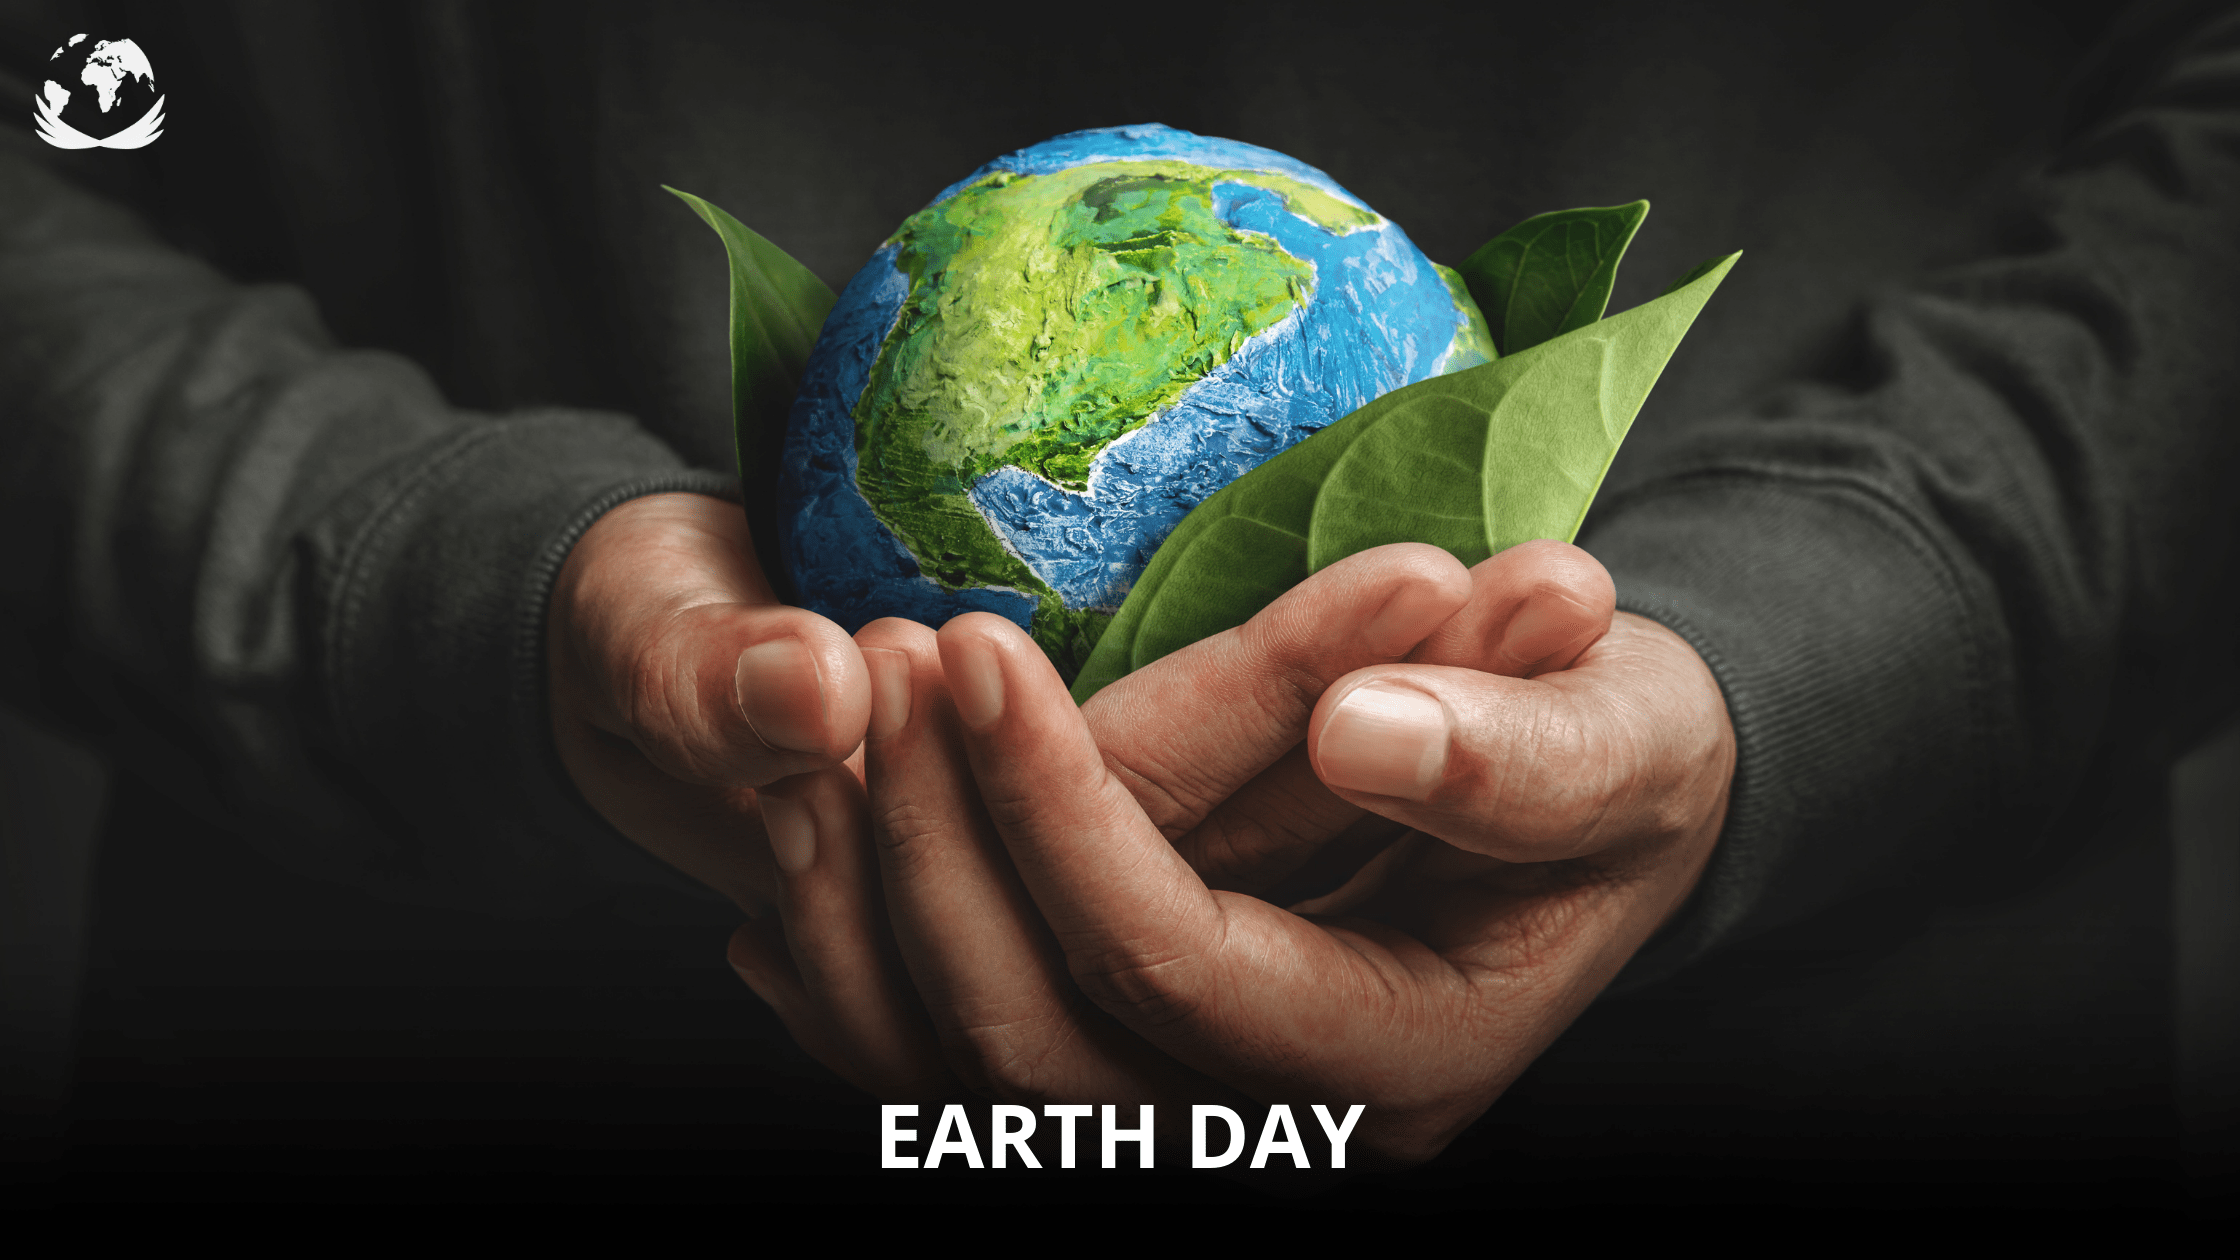 Earth Day on April 22nd